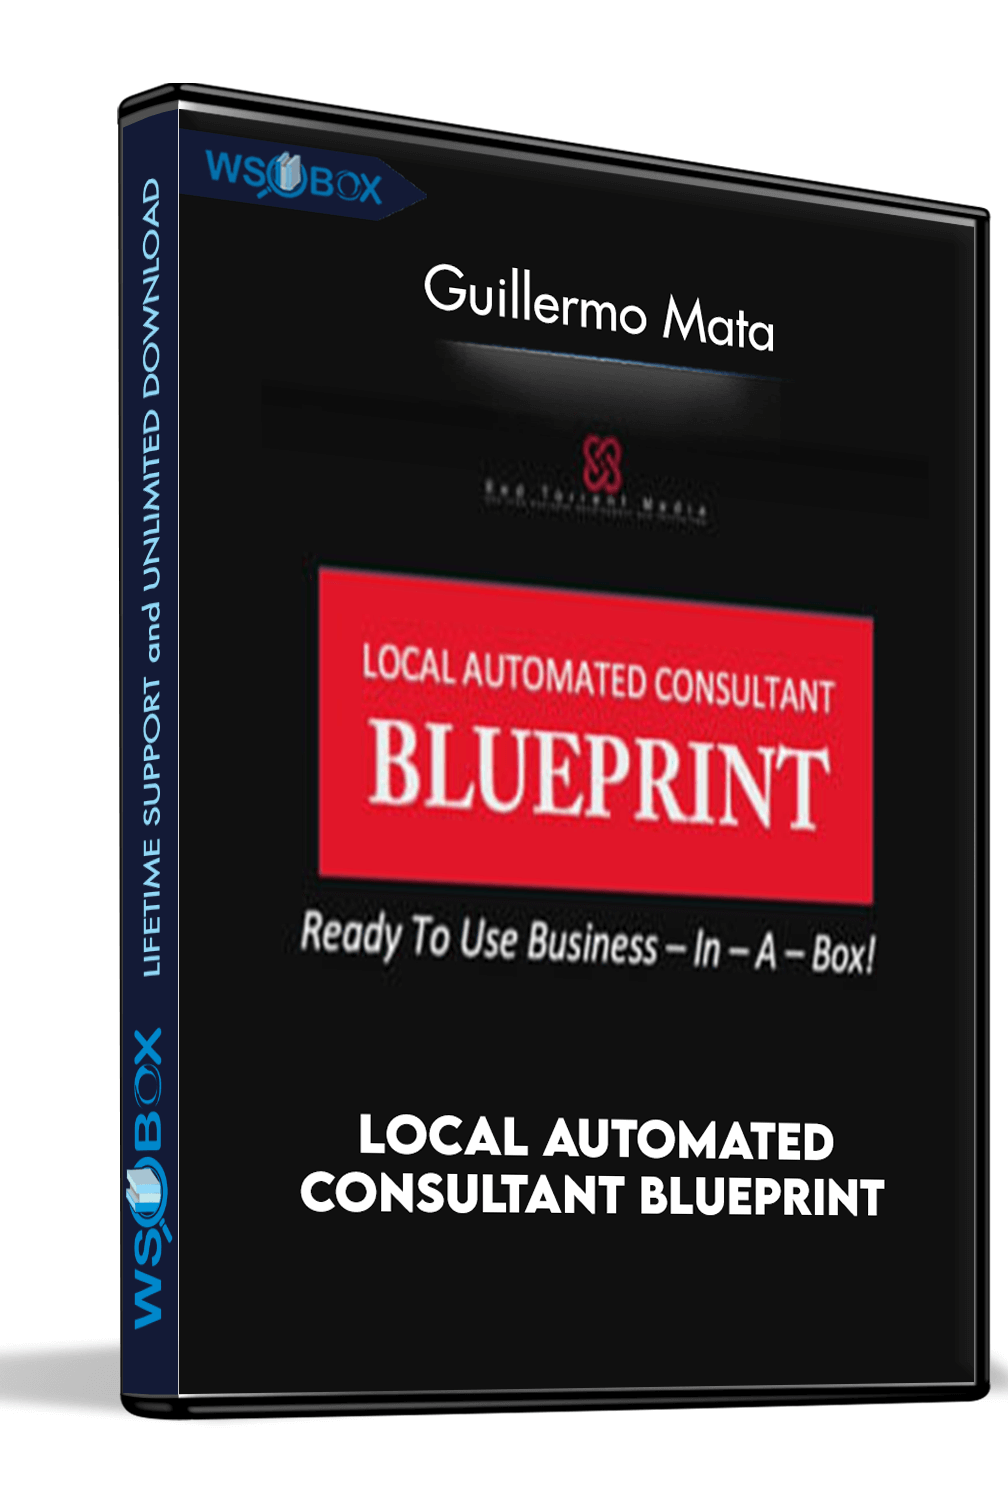 local-automated-consultant-blueprint-guillermo-mata